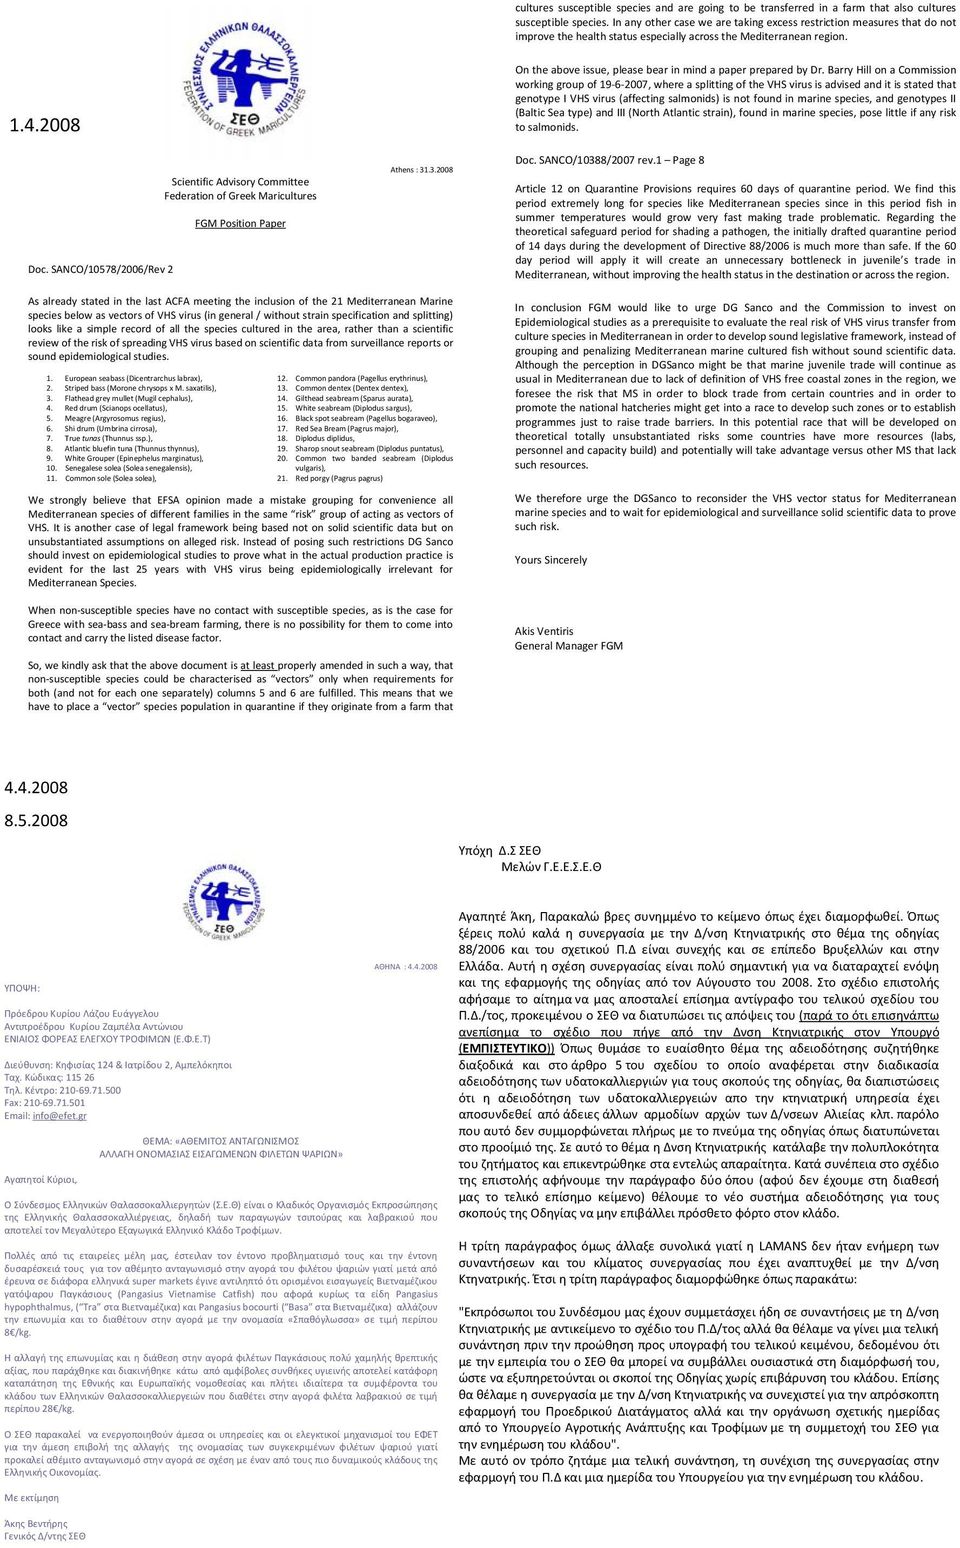 SANCO/10578/2006/Rev 2 Scientific Advisory Committee Federation of Greek Maricultures FGM Position Paper Athens : 31.3.2008 On the above issue, please bear in mind a paper prepared by Dr.